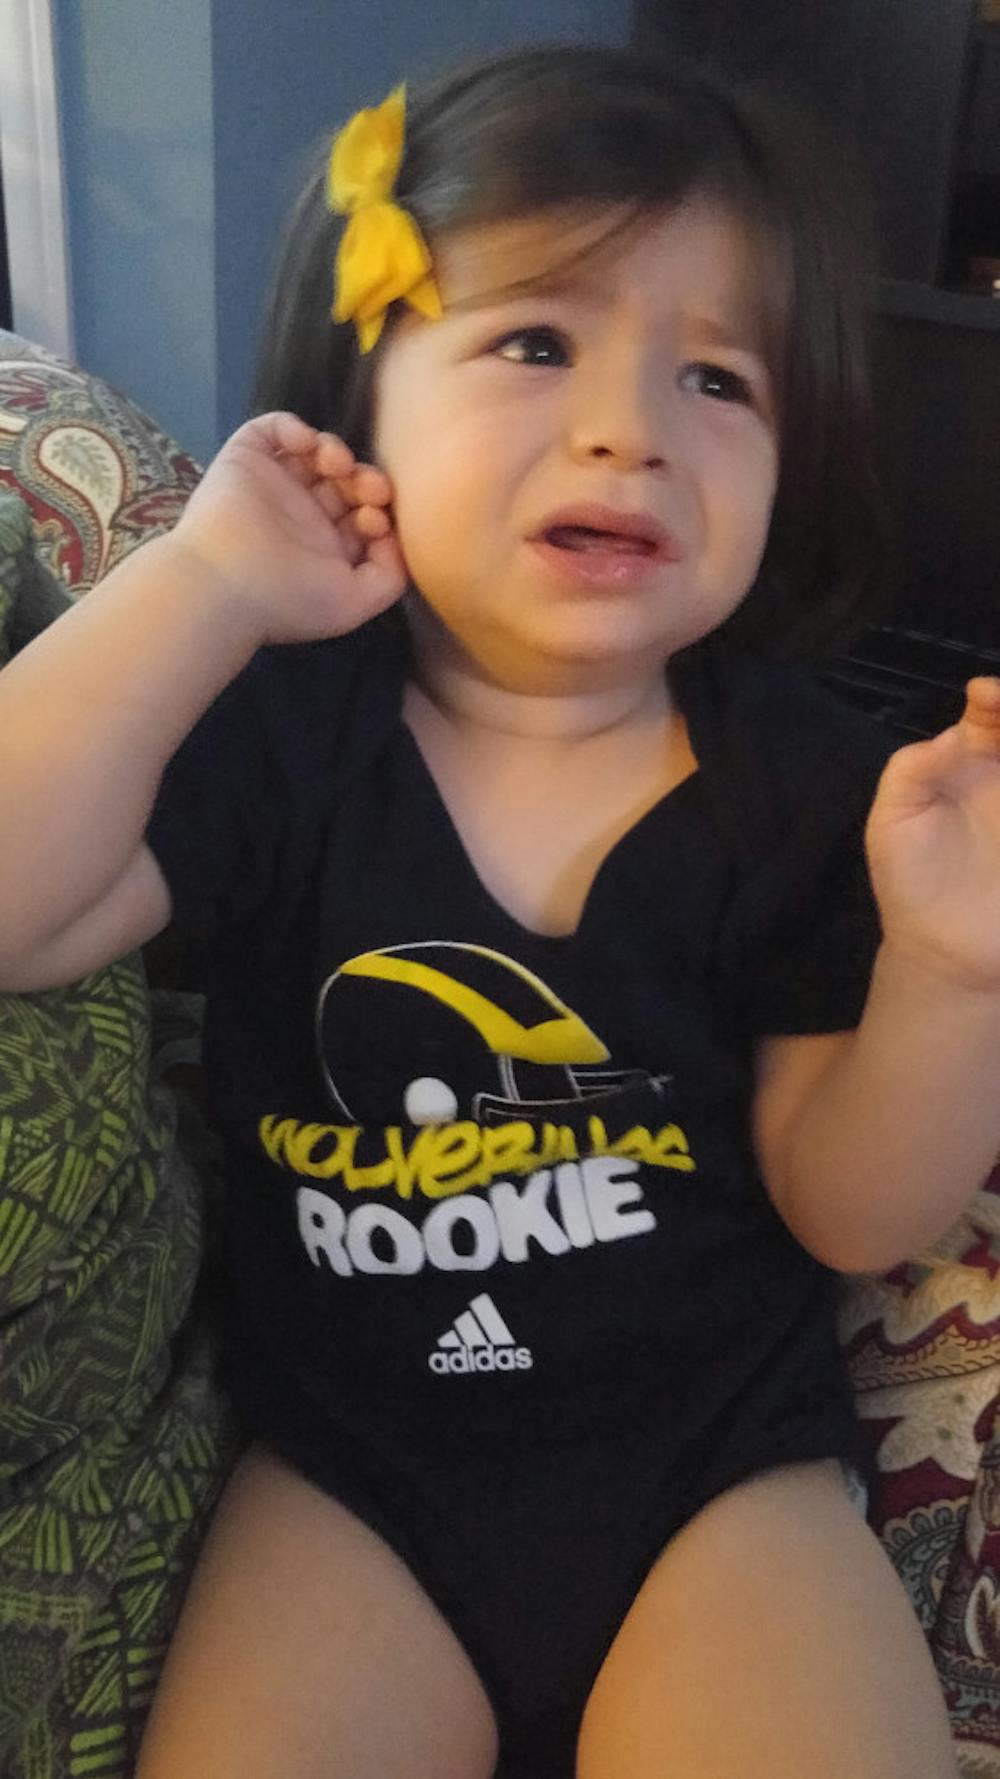 <p><span id="docs-internal-guid-ff36c799-3c4b-bac1-41ce-be626c622a26"><span>Lily, the daughter of tormented Gator fan Daniel Stone, offers an uncomfortable expression while wearing Michigan apparel.</span></span></p>